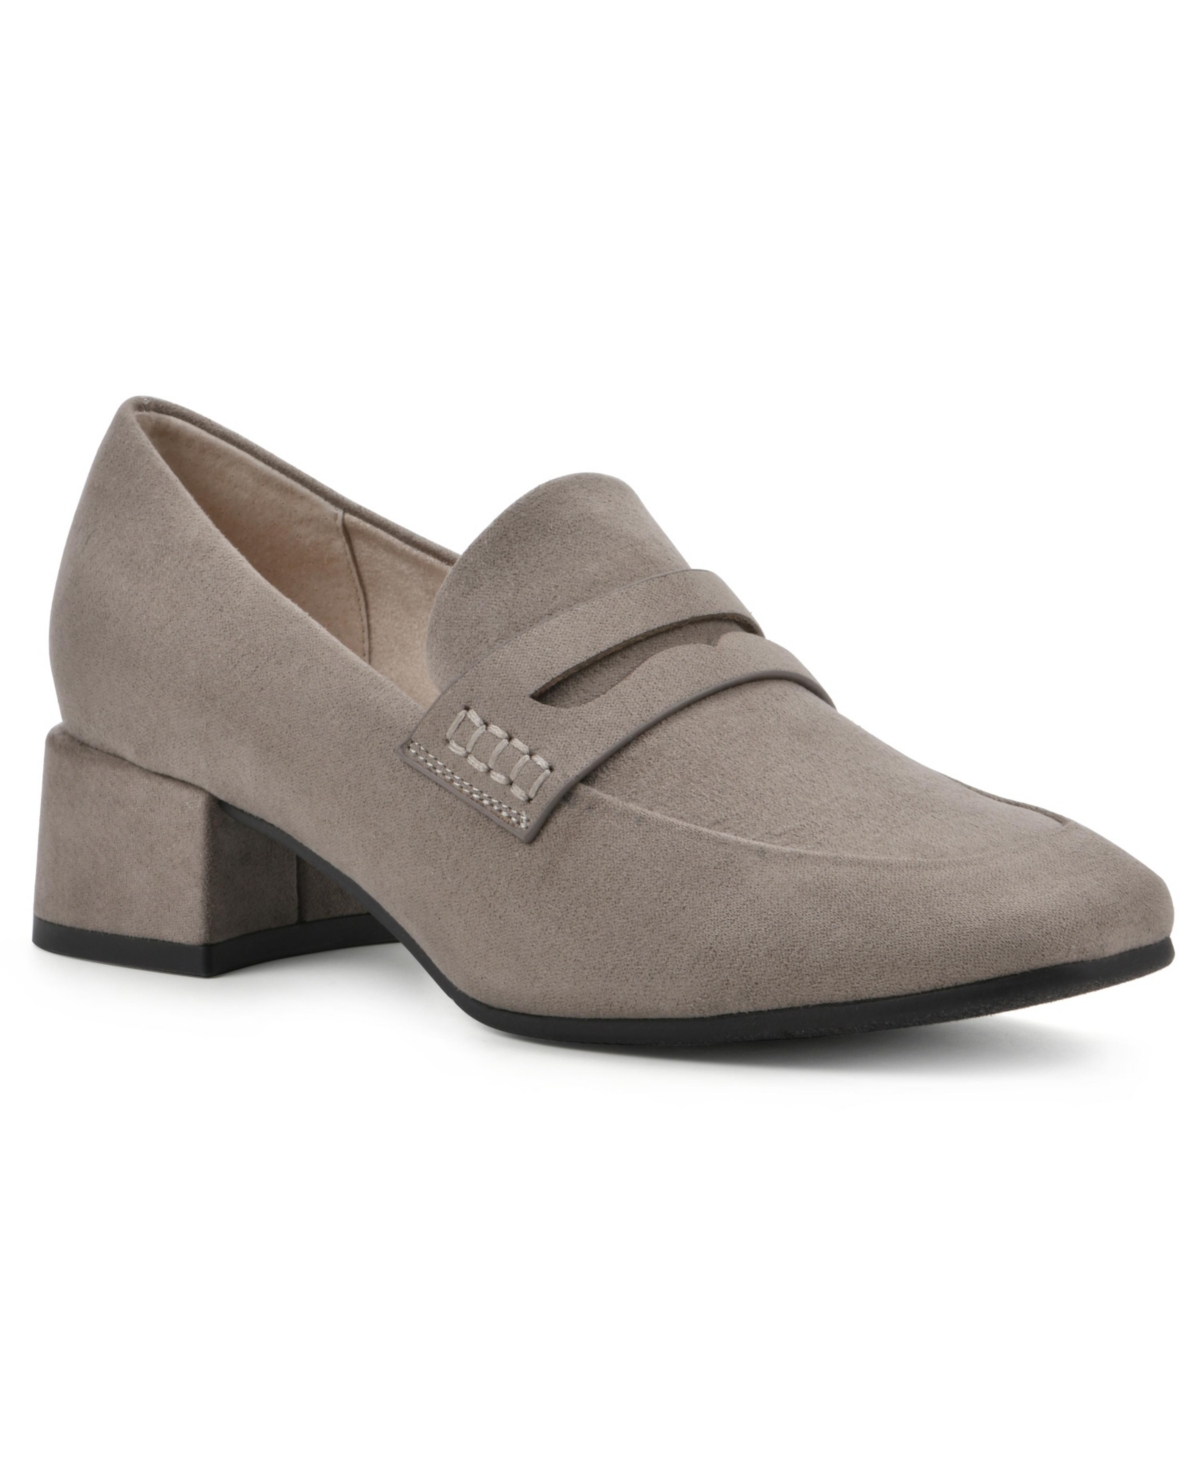 Women's Quiana Dress Loafer - Taupe, Suedette- Textile